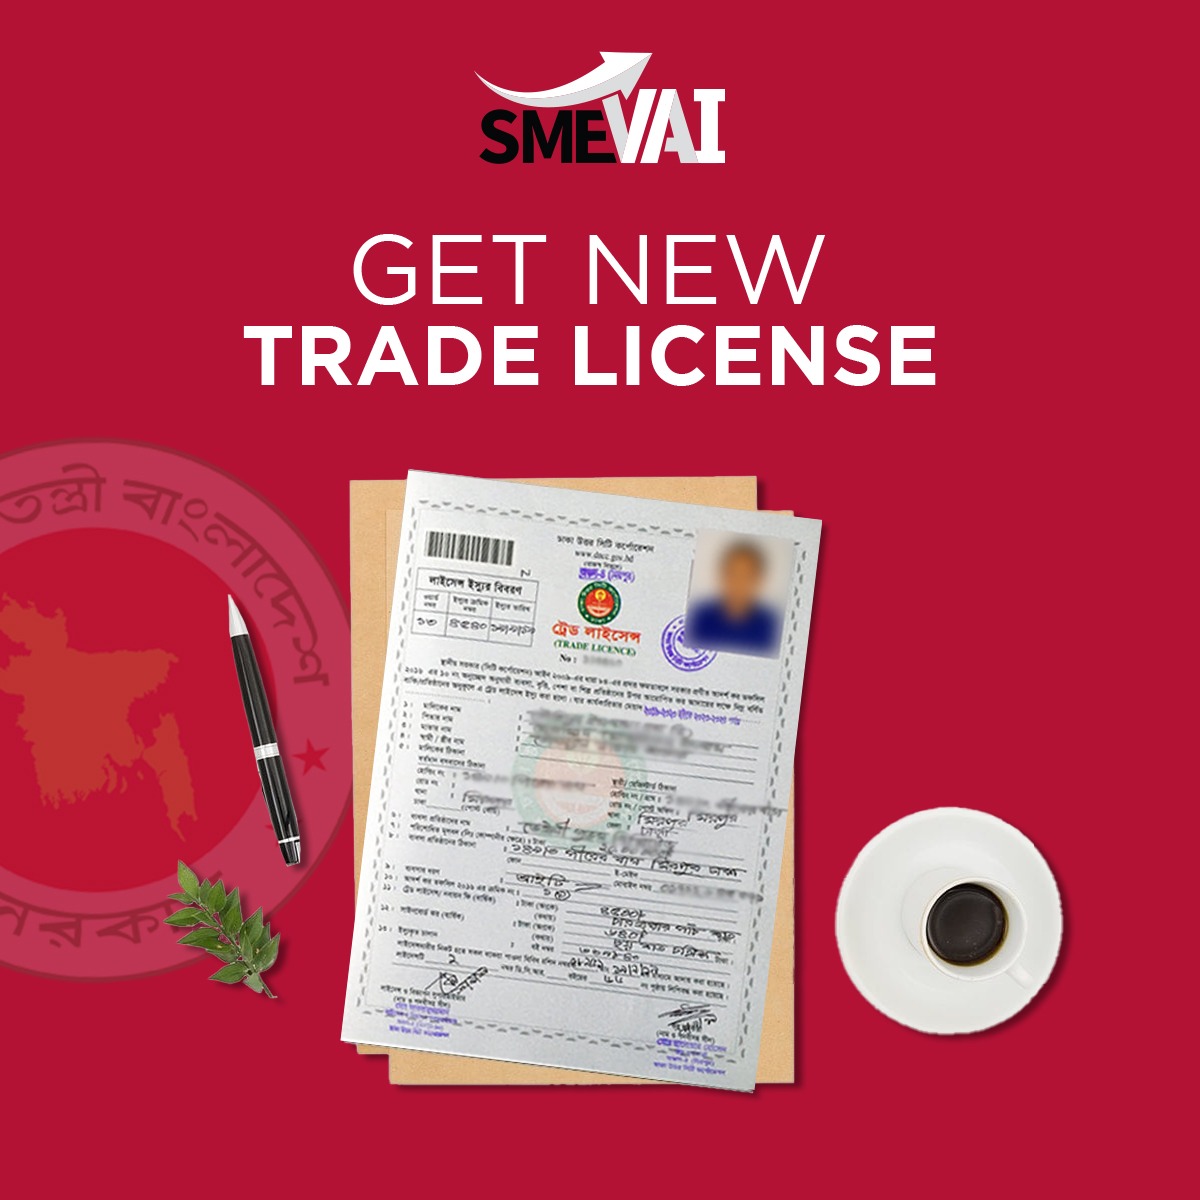 How to Apply for New Trade License